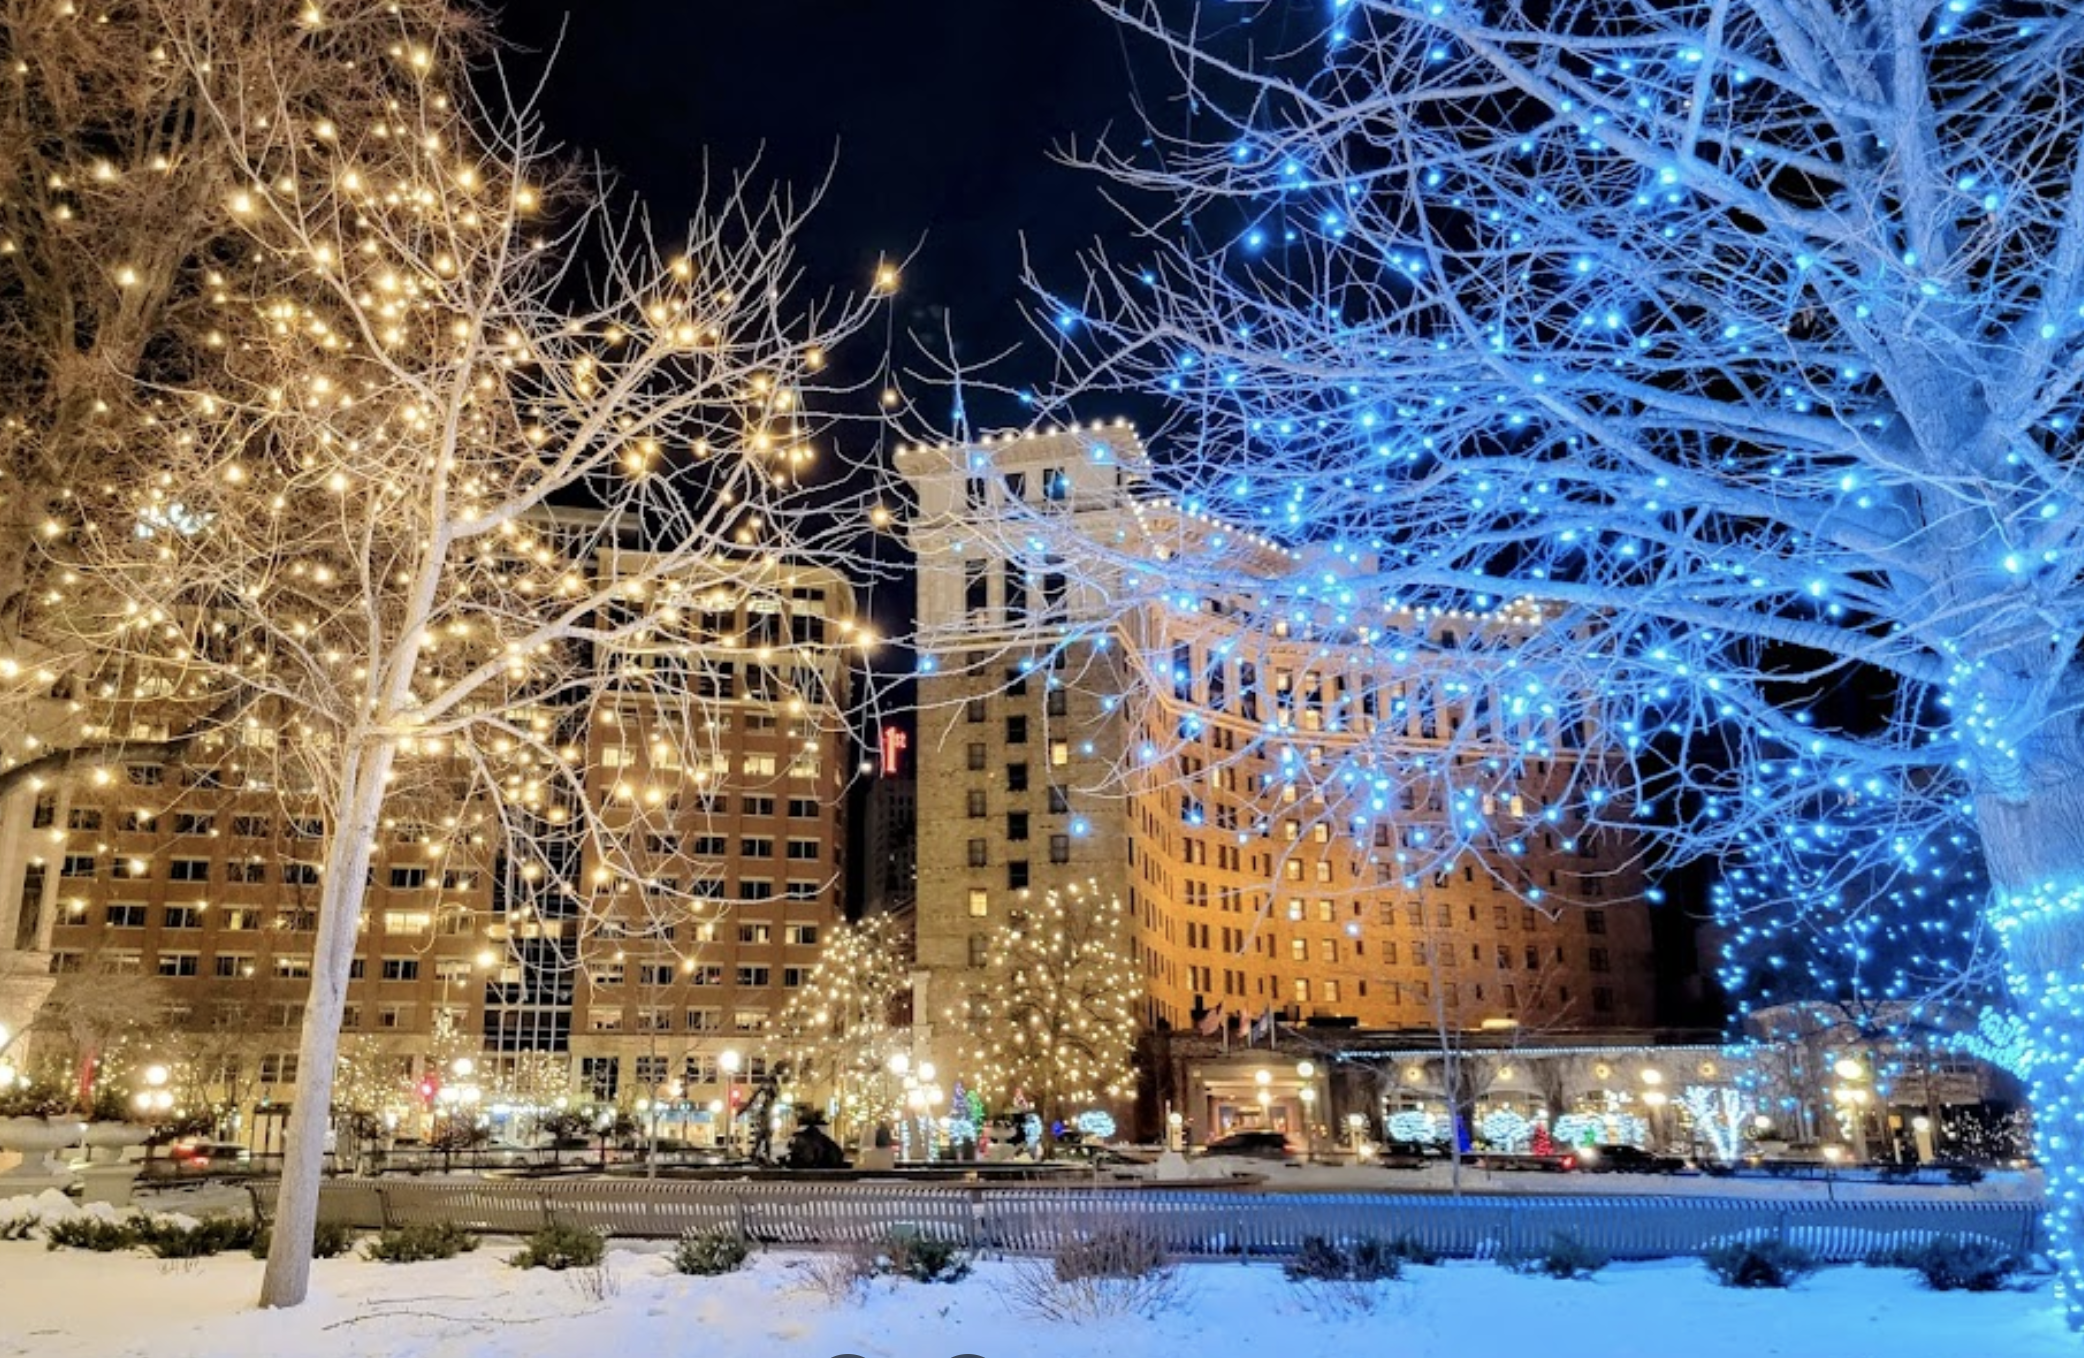 The Most Festive Hotel In Minnesota Is In Downtown St. Paul